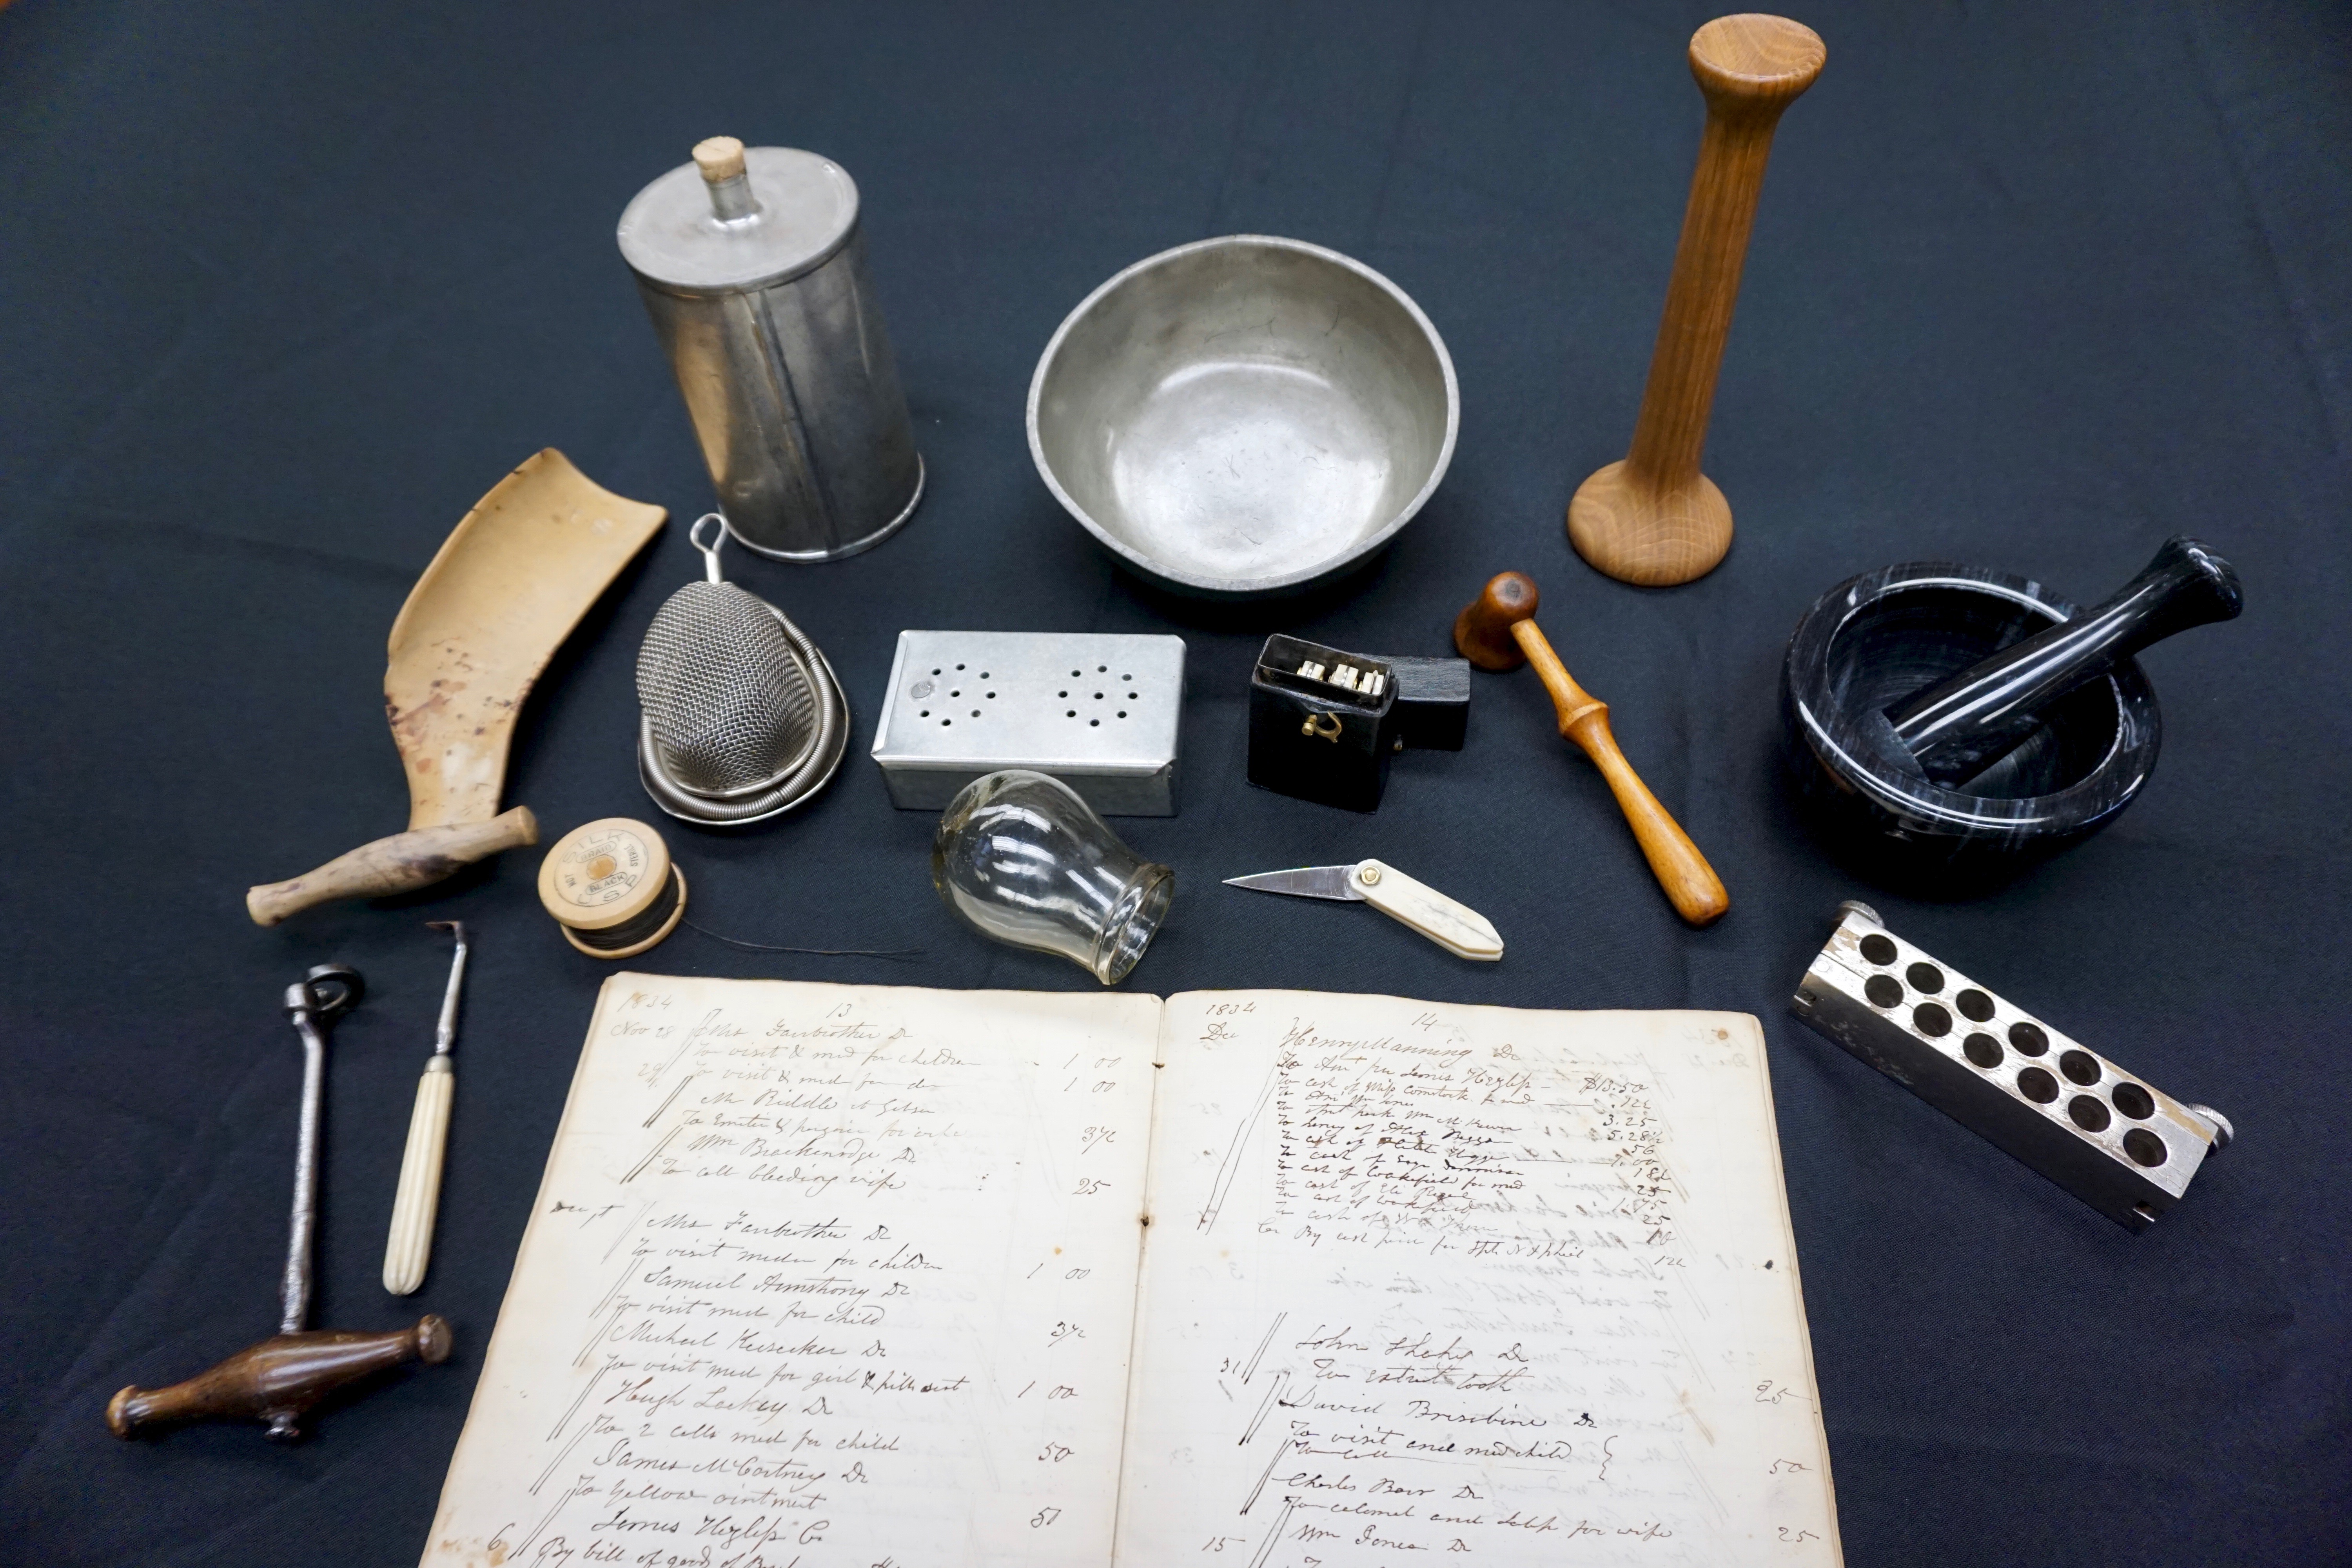 19th century medical tools used in suitcase tour